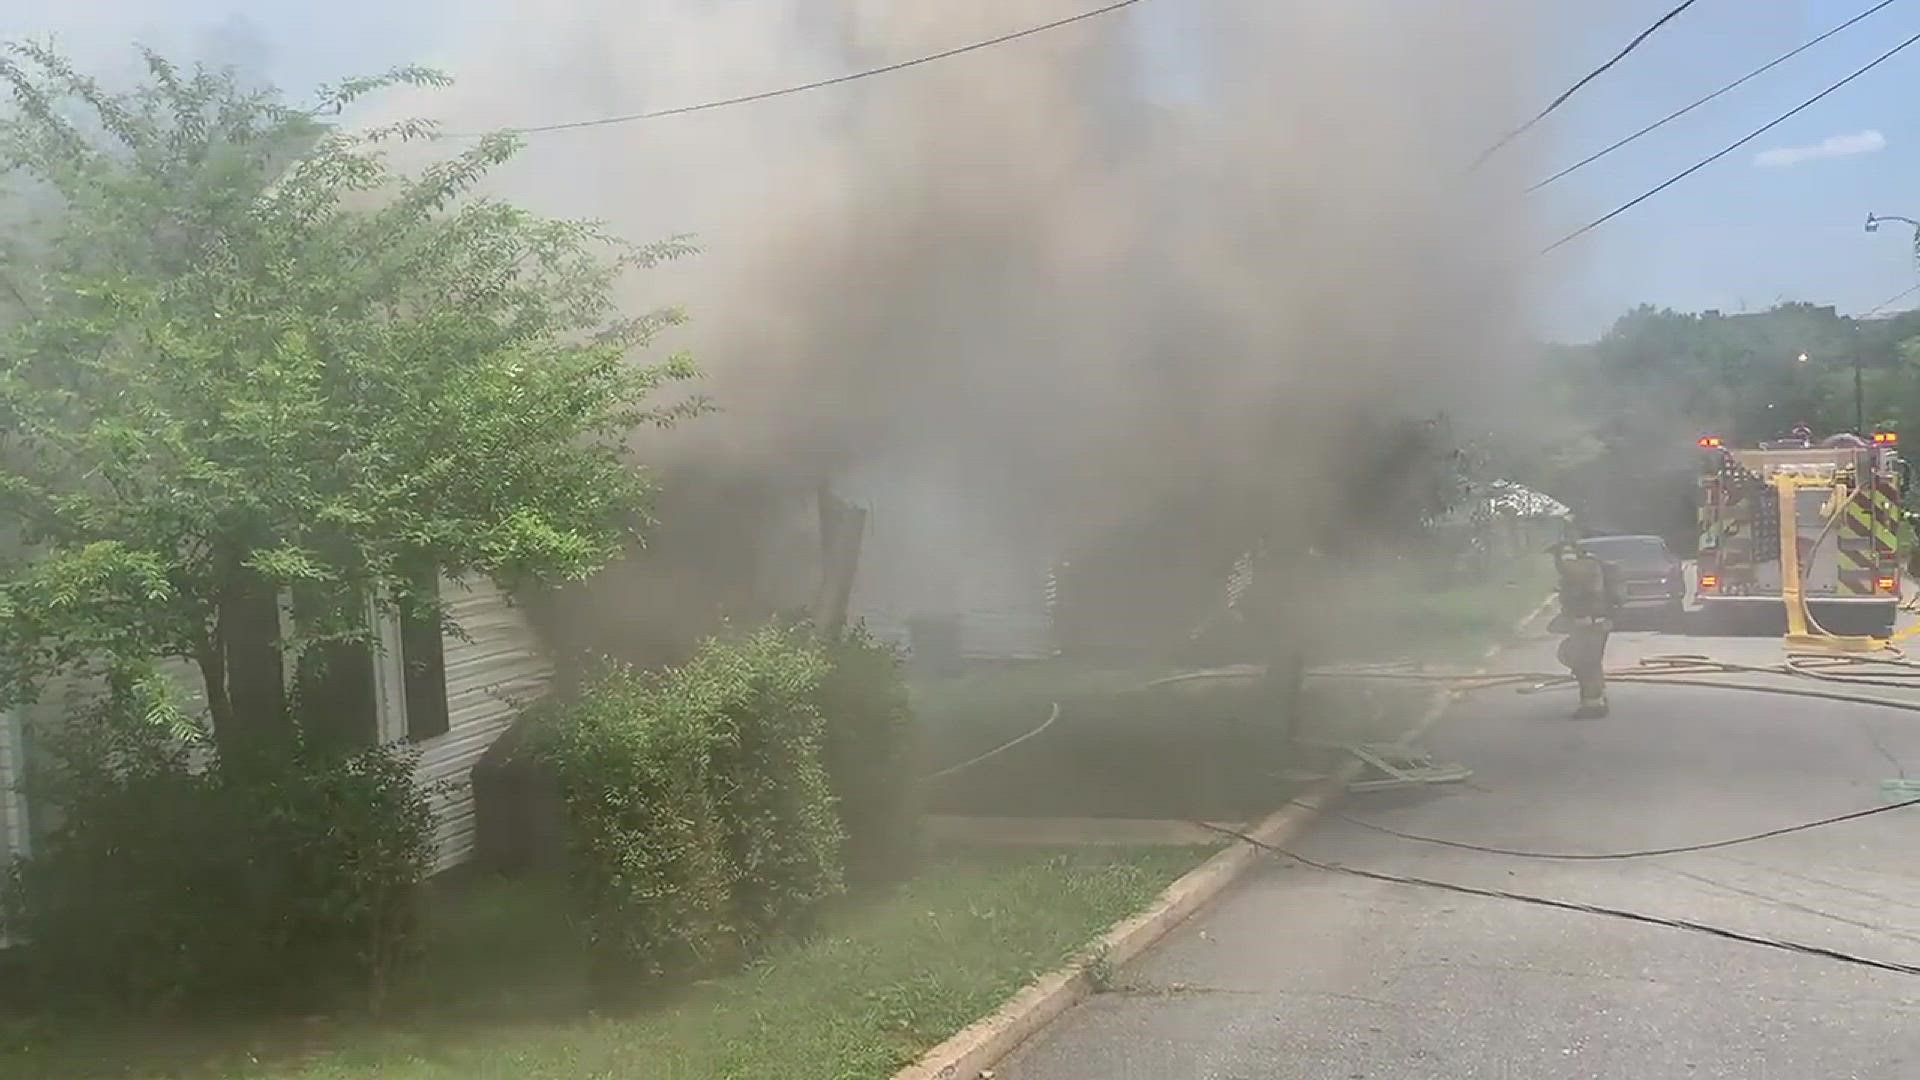 House fire on 13th street